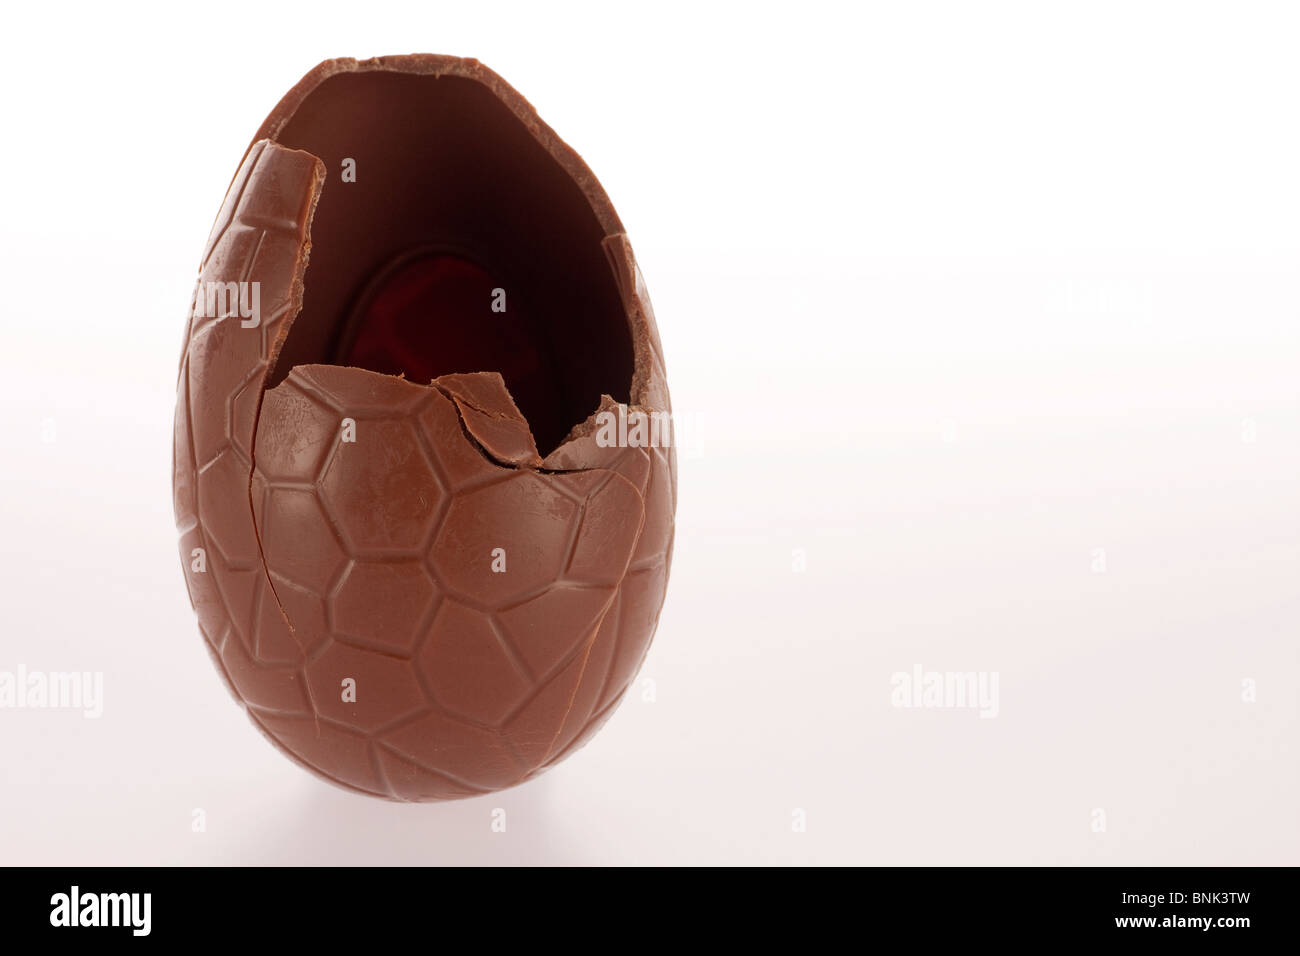 Chocolate easter egg with the top broken off Stock Photo - Alamy